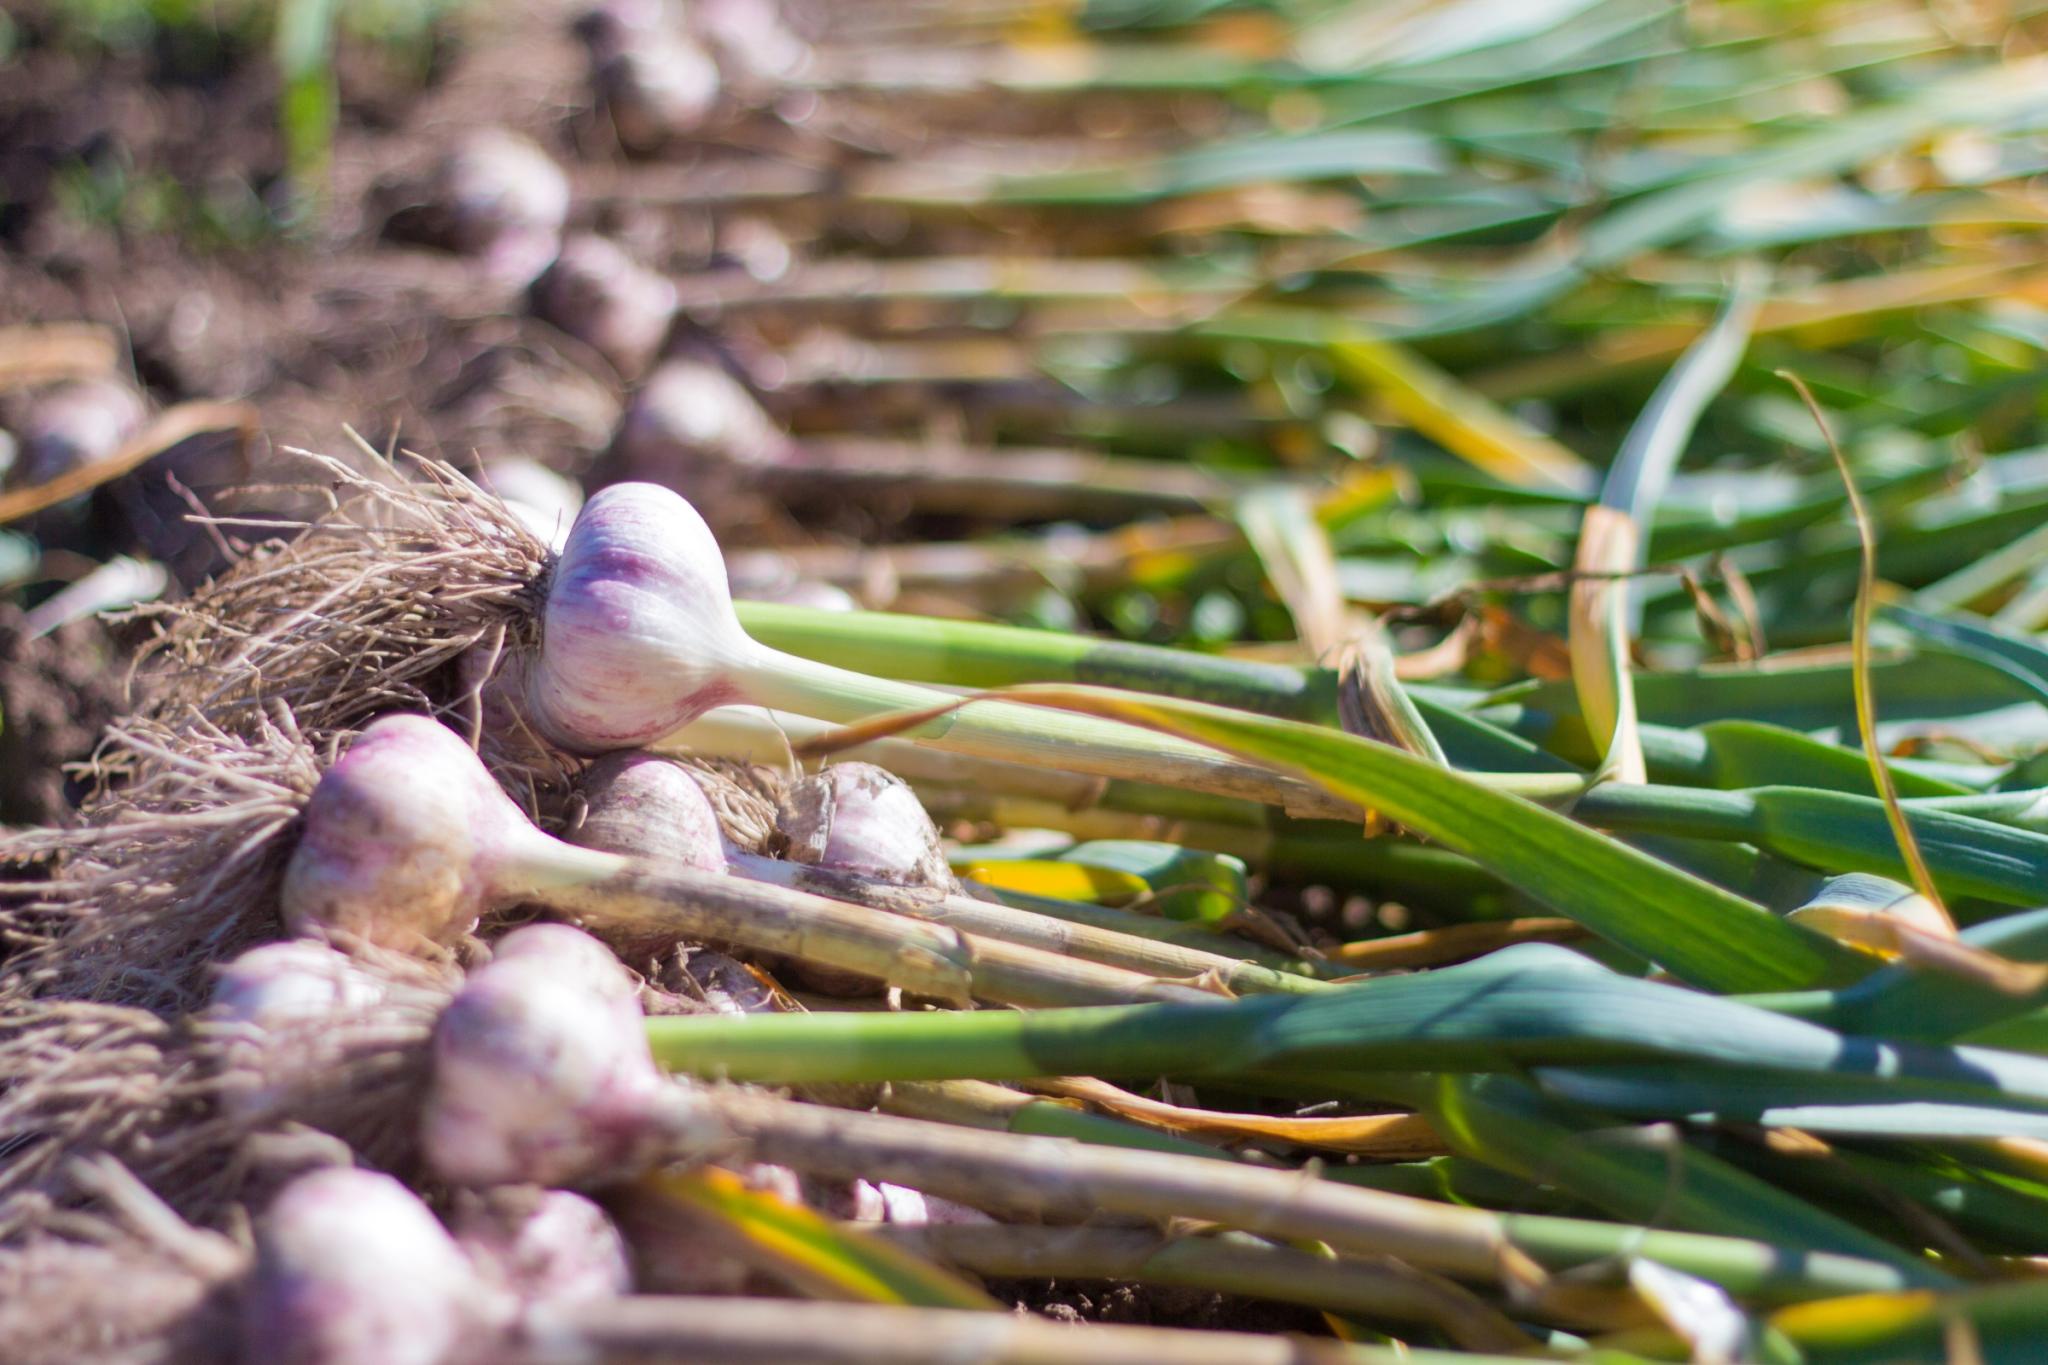 Where To Buy Softneck Garlic For Planting